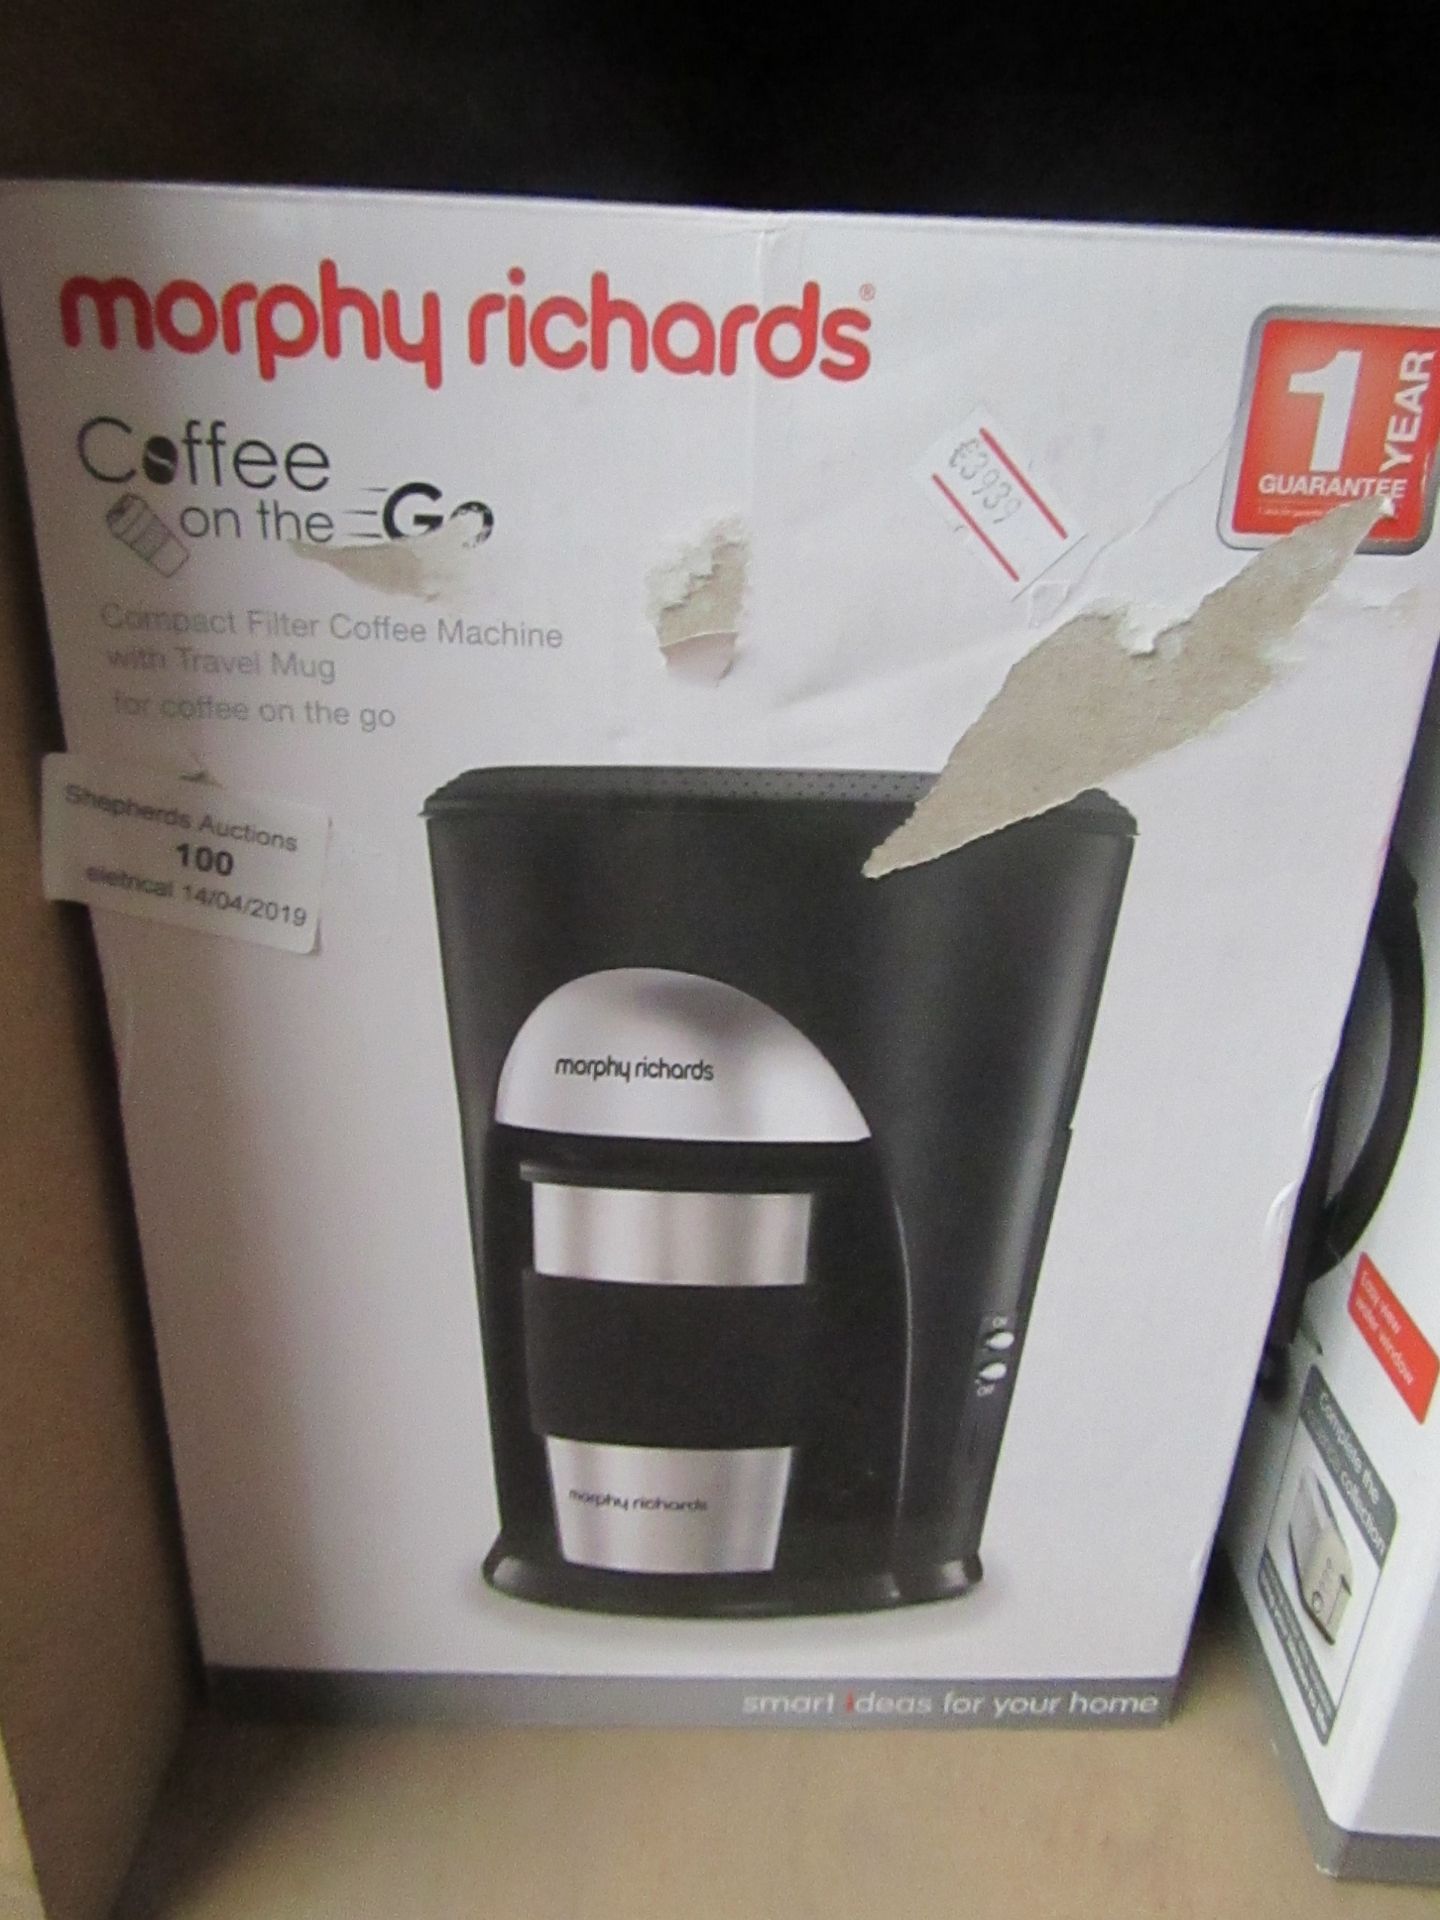 Morphy richards compact coffee machine powers on and boxed